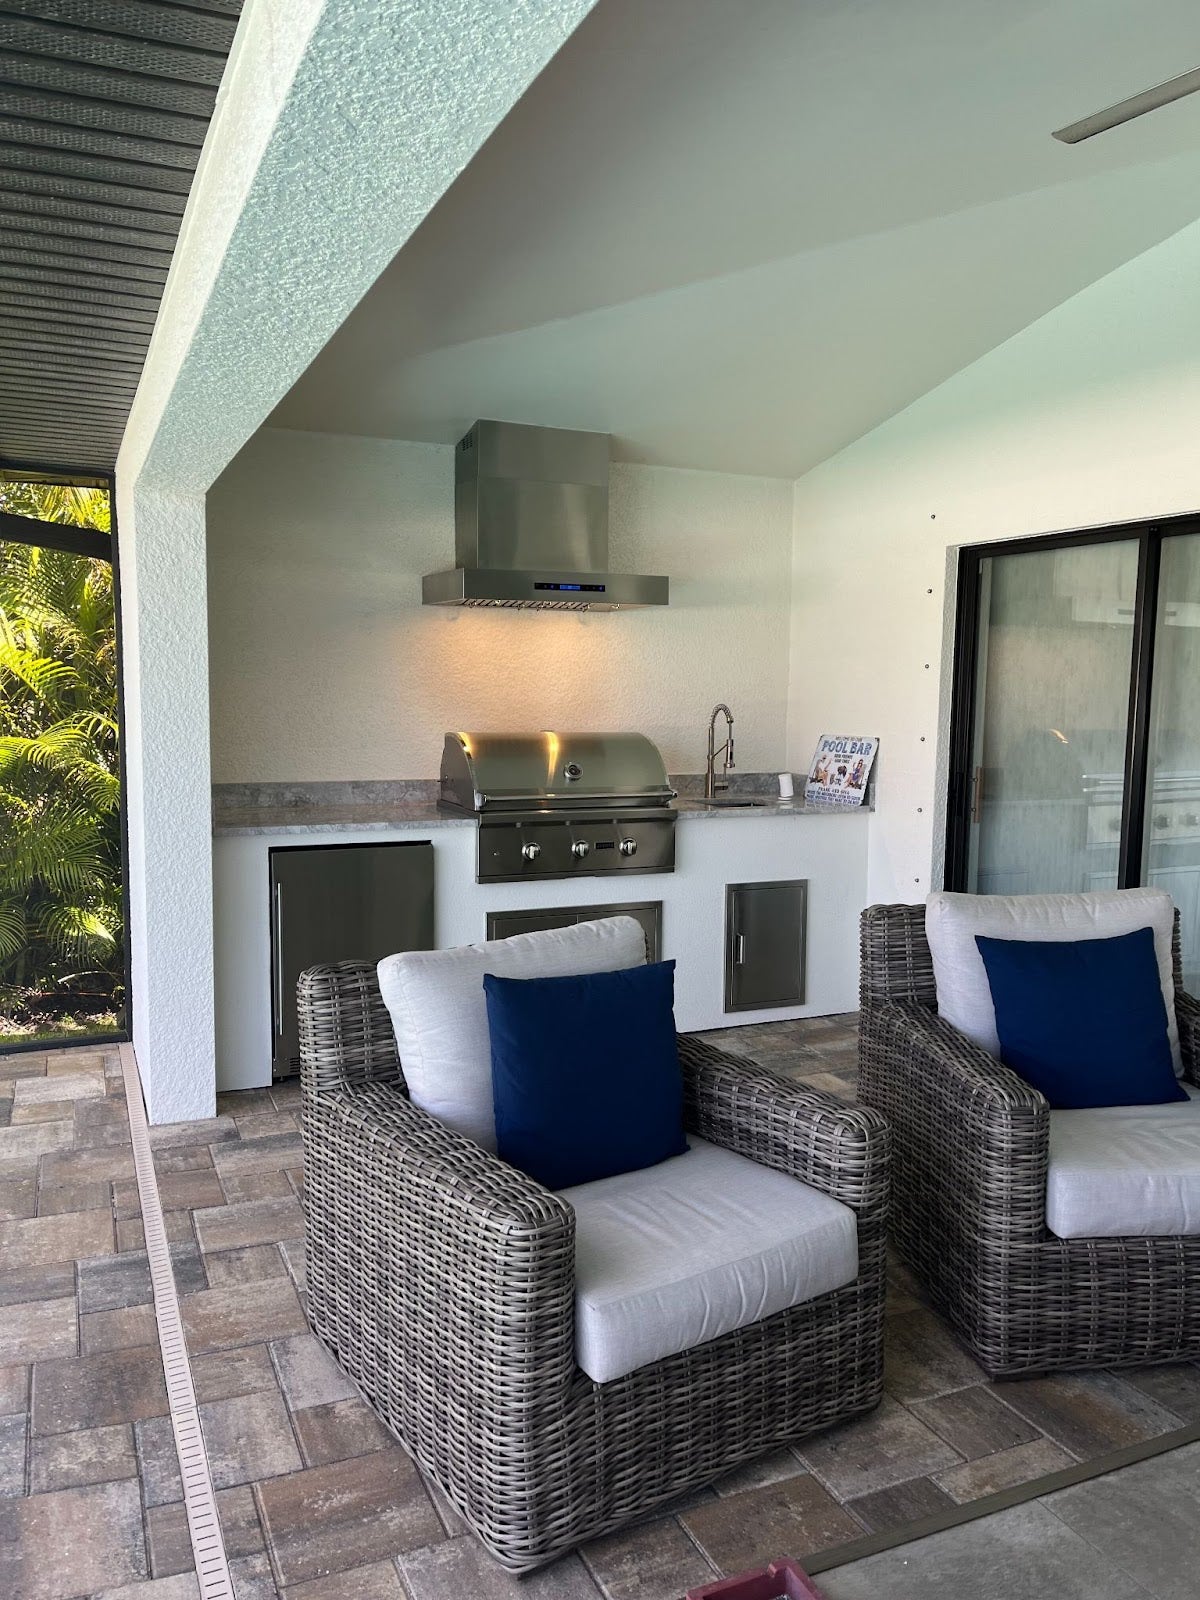 Cozy outdoor patio area with wicker armchairs and cushions, complete with a built-in barbecue  - Proline Range Hoods - prolinerangehoods.com  and stainless steel mini fridge under a modern vent hood.